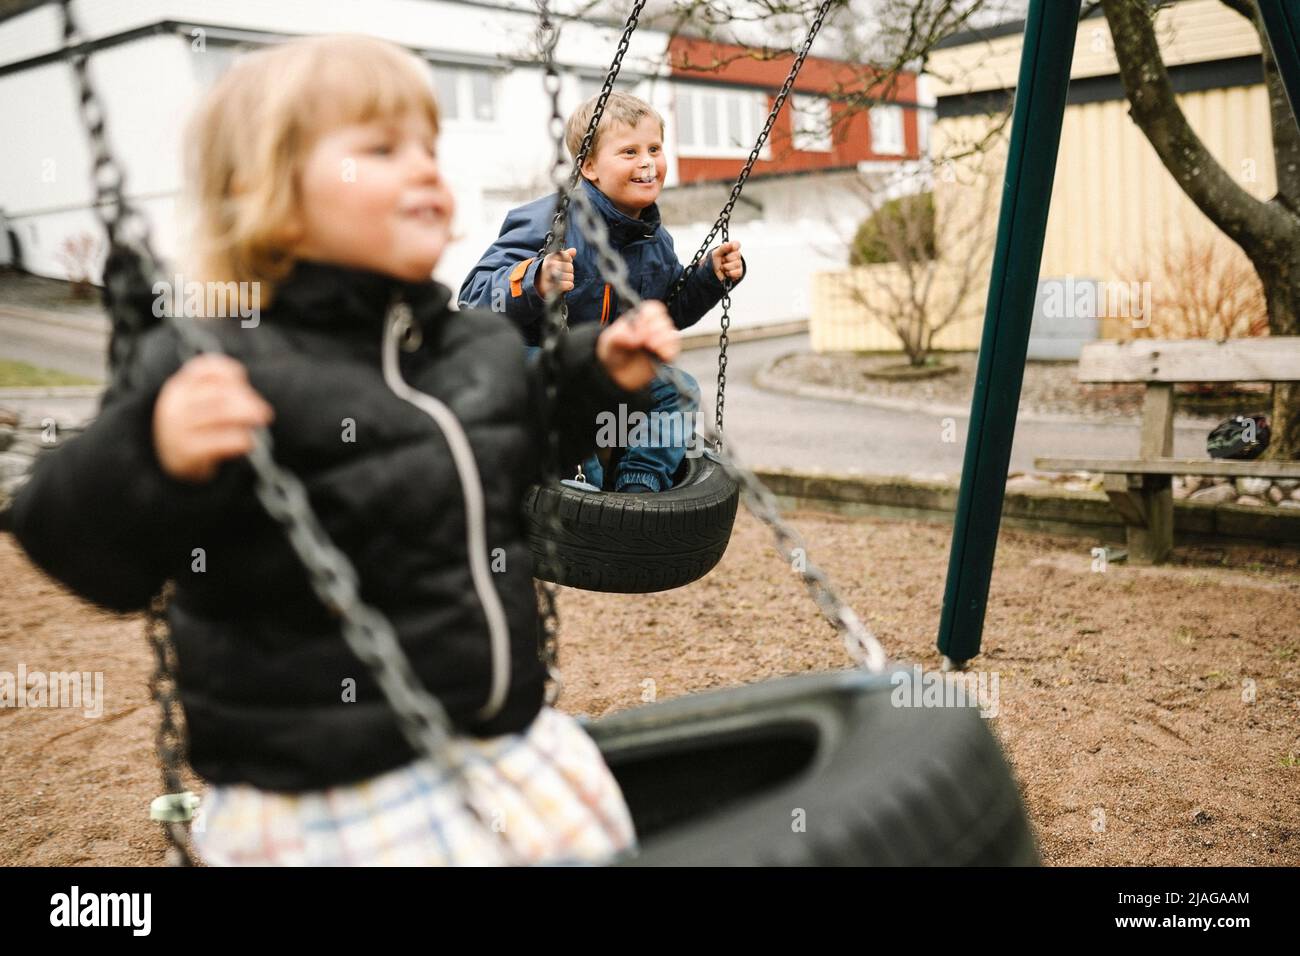 Playful brother and sister having fun on tire swing at park Stock Photo